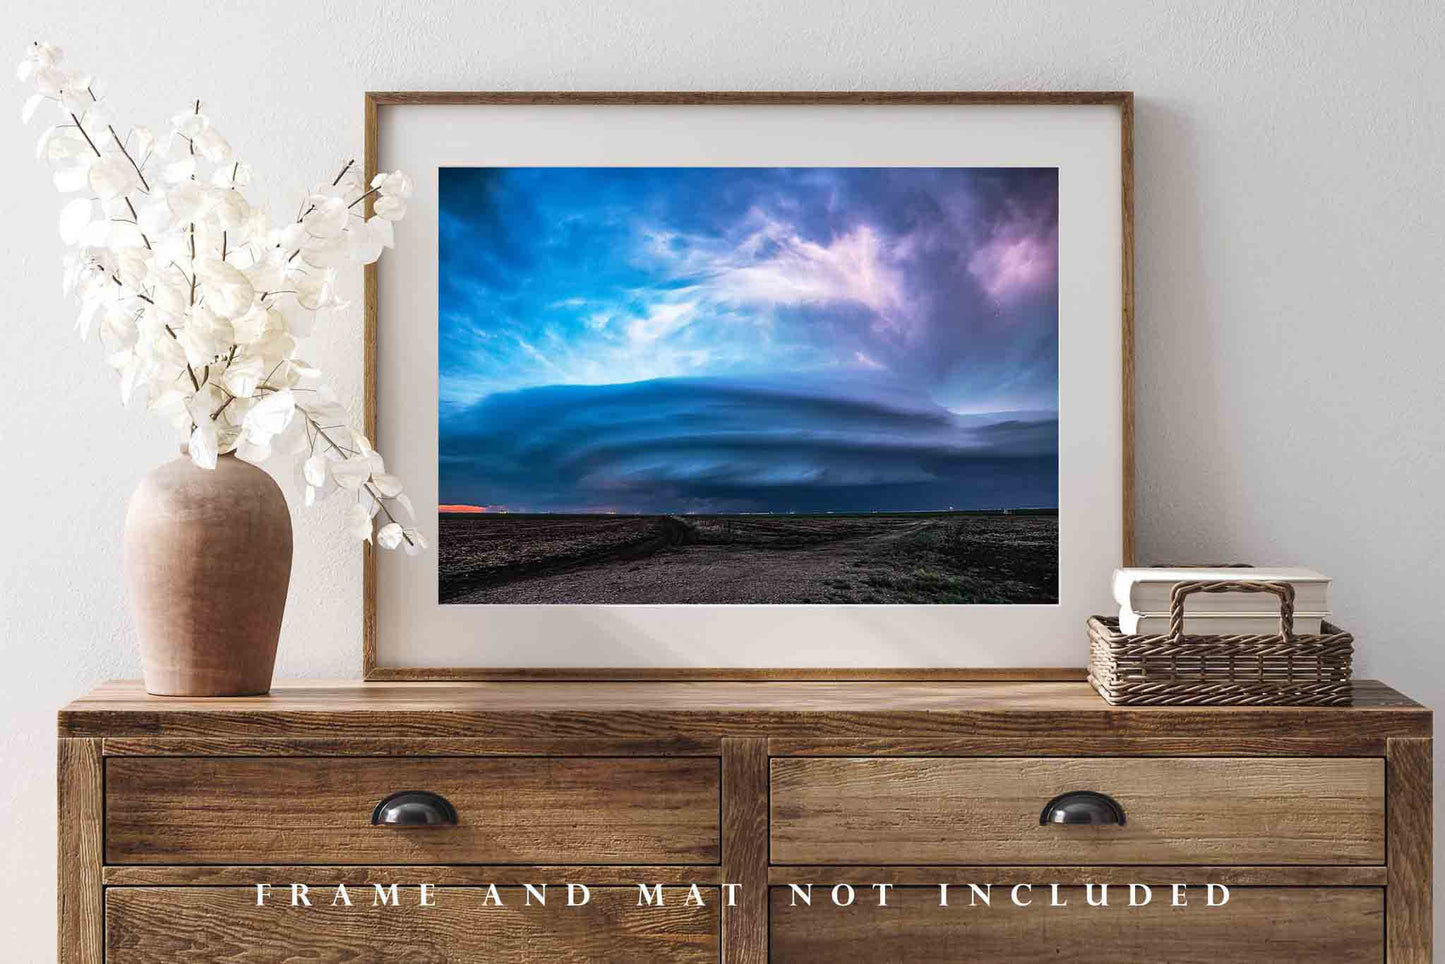 Storm Wall Art Photography Print - Picture of Supercell Thundestorm Illuminated by Lightning at Night in Kansas Weather Photo Artwork Decor